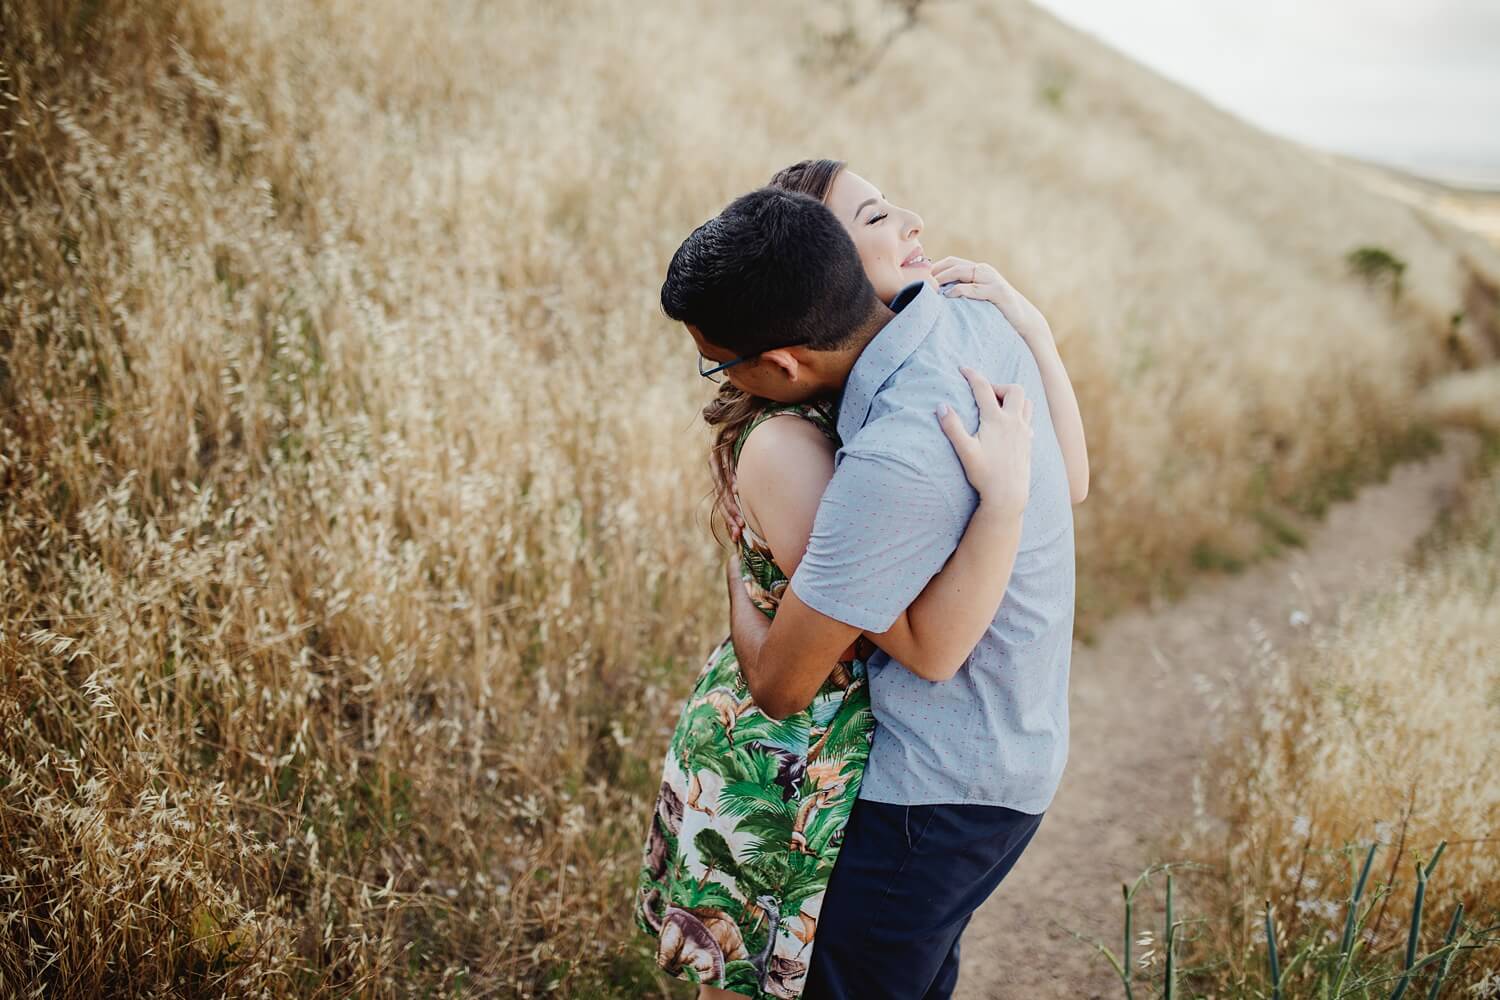 san francisco bay area east bay coyote hills rocks fields bay engagement photography couples portrait session engagement photos natural light affordable wedding photography